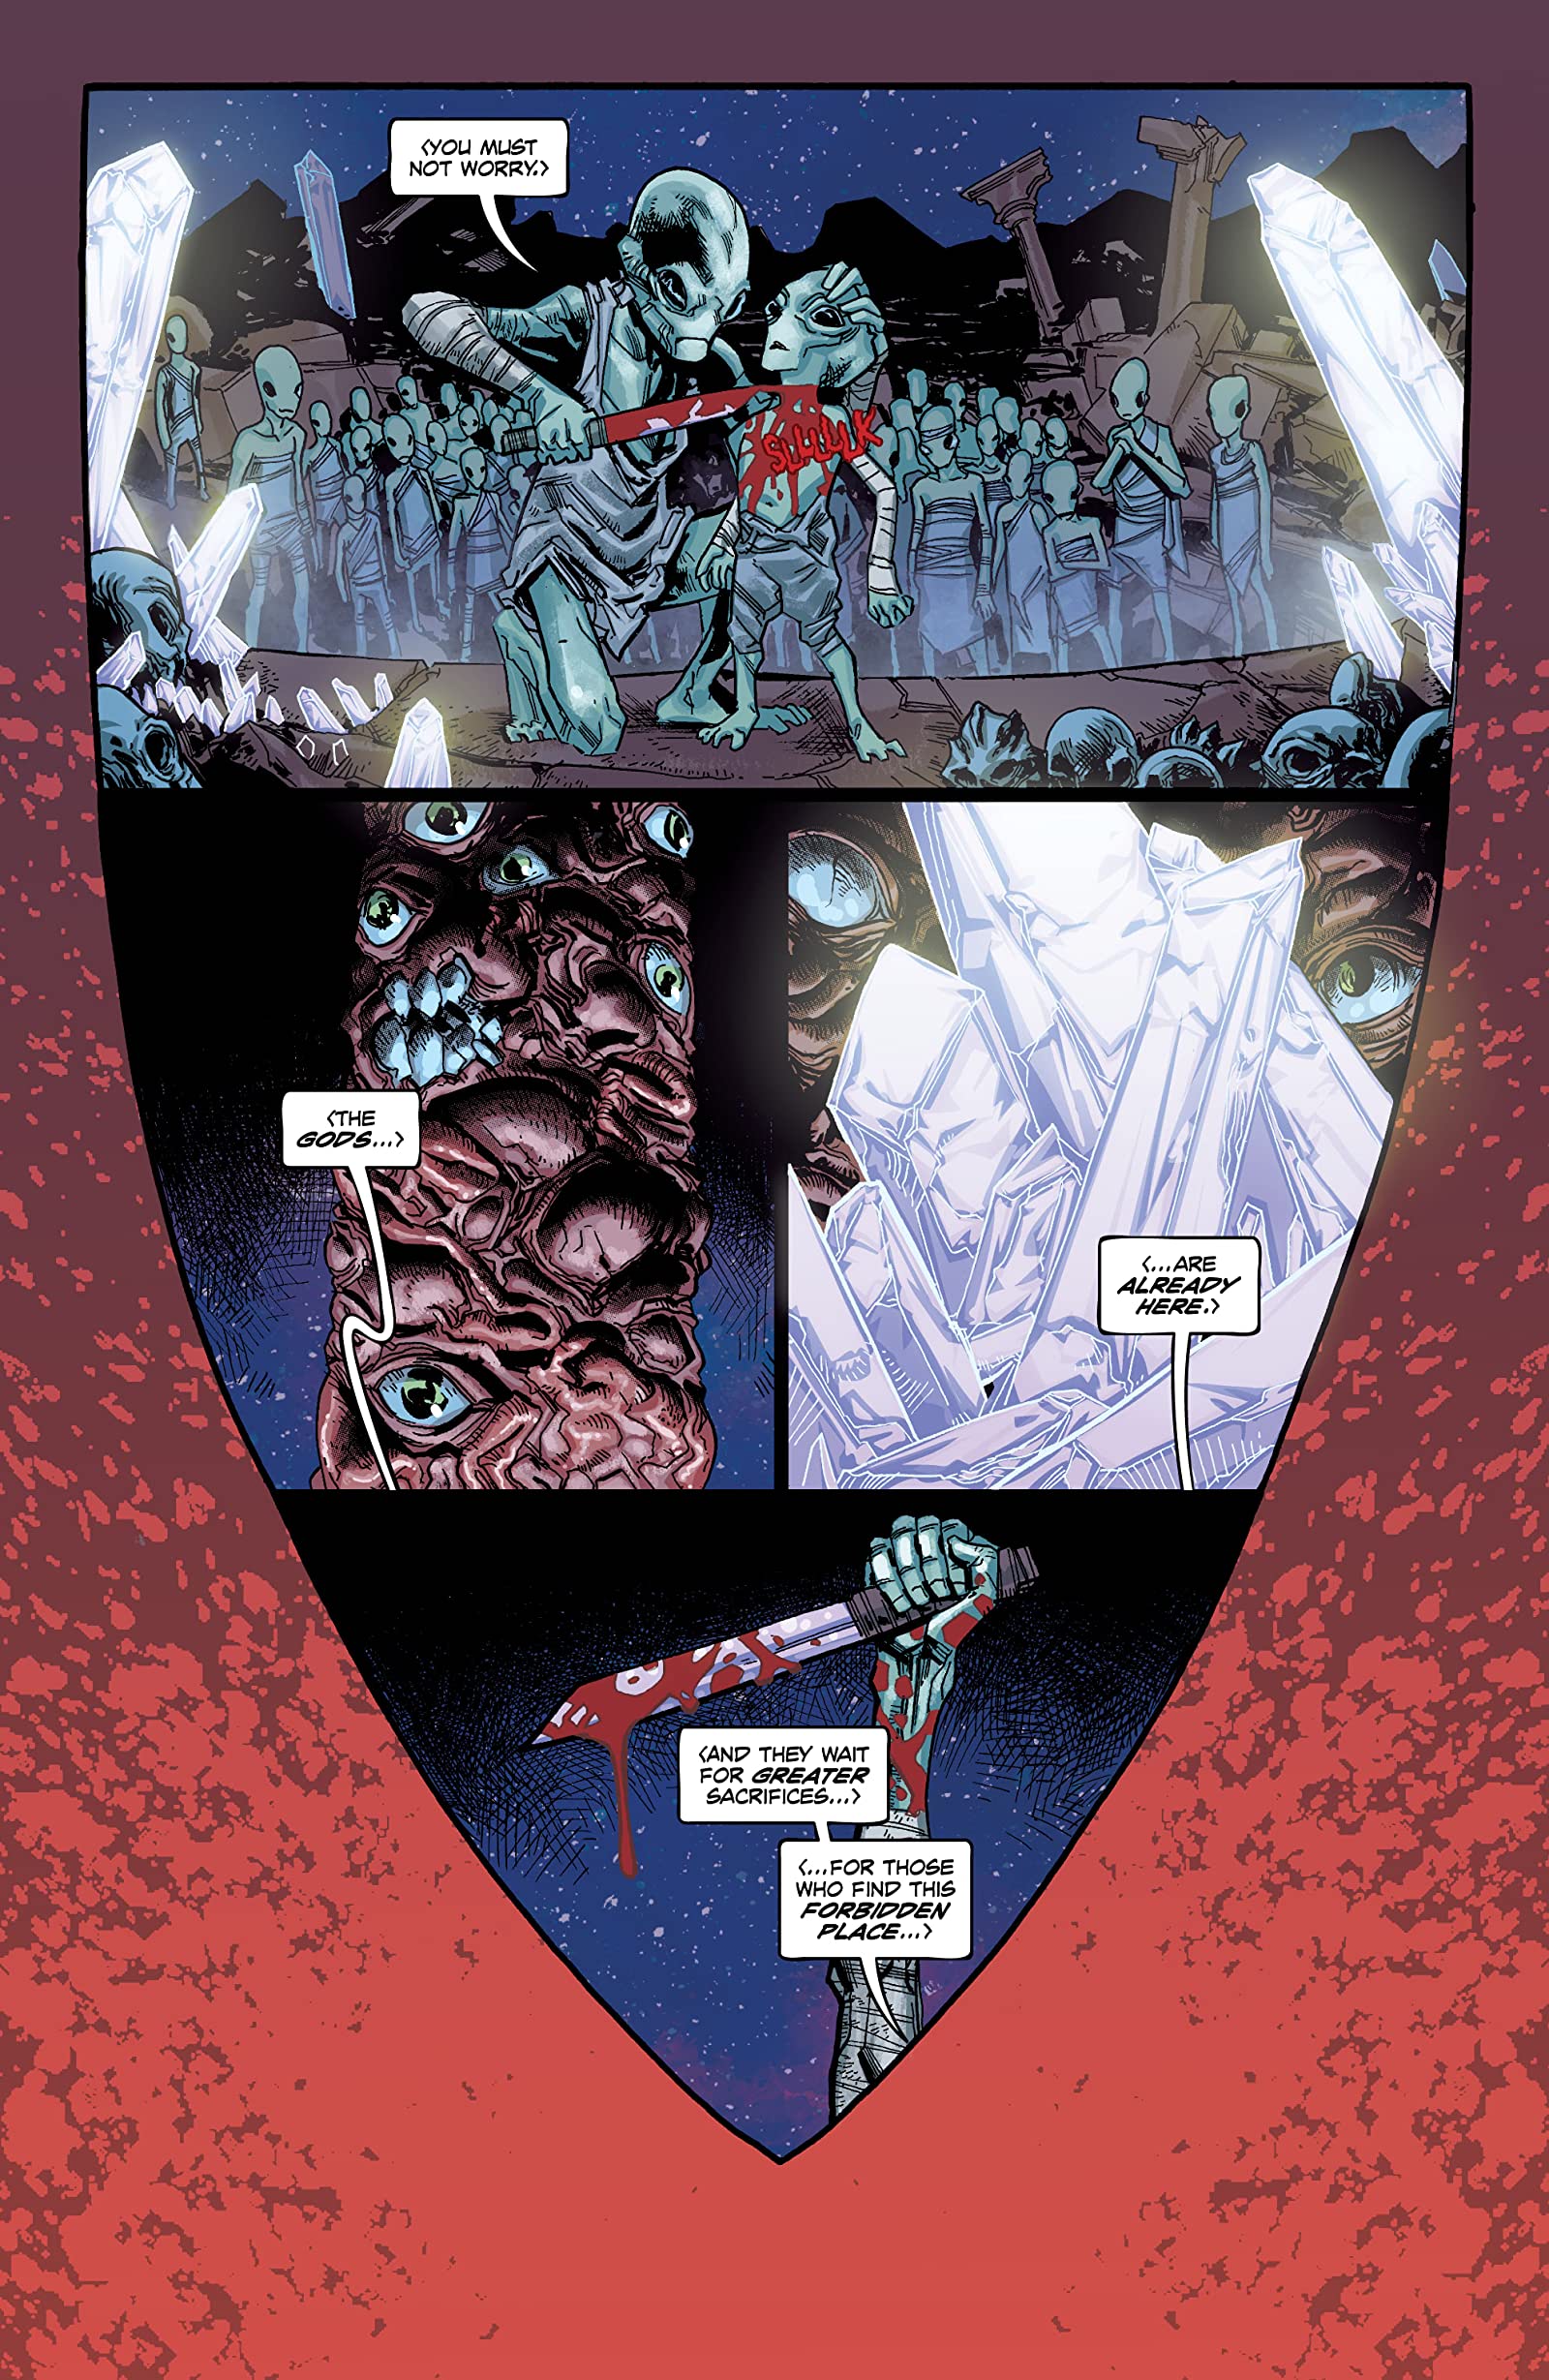 A series of panels (shaped like a shield) show the planet’s native race; one of them is sacrificing its own child by slitting the child's throat at the base of the fleshy monster, next to glowing crystals. 